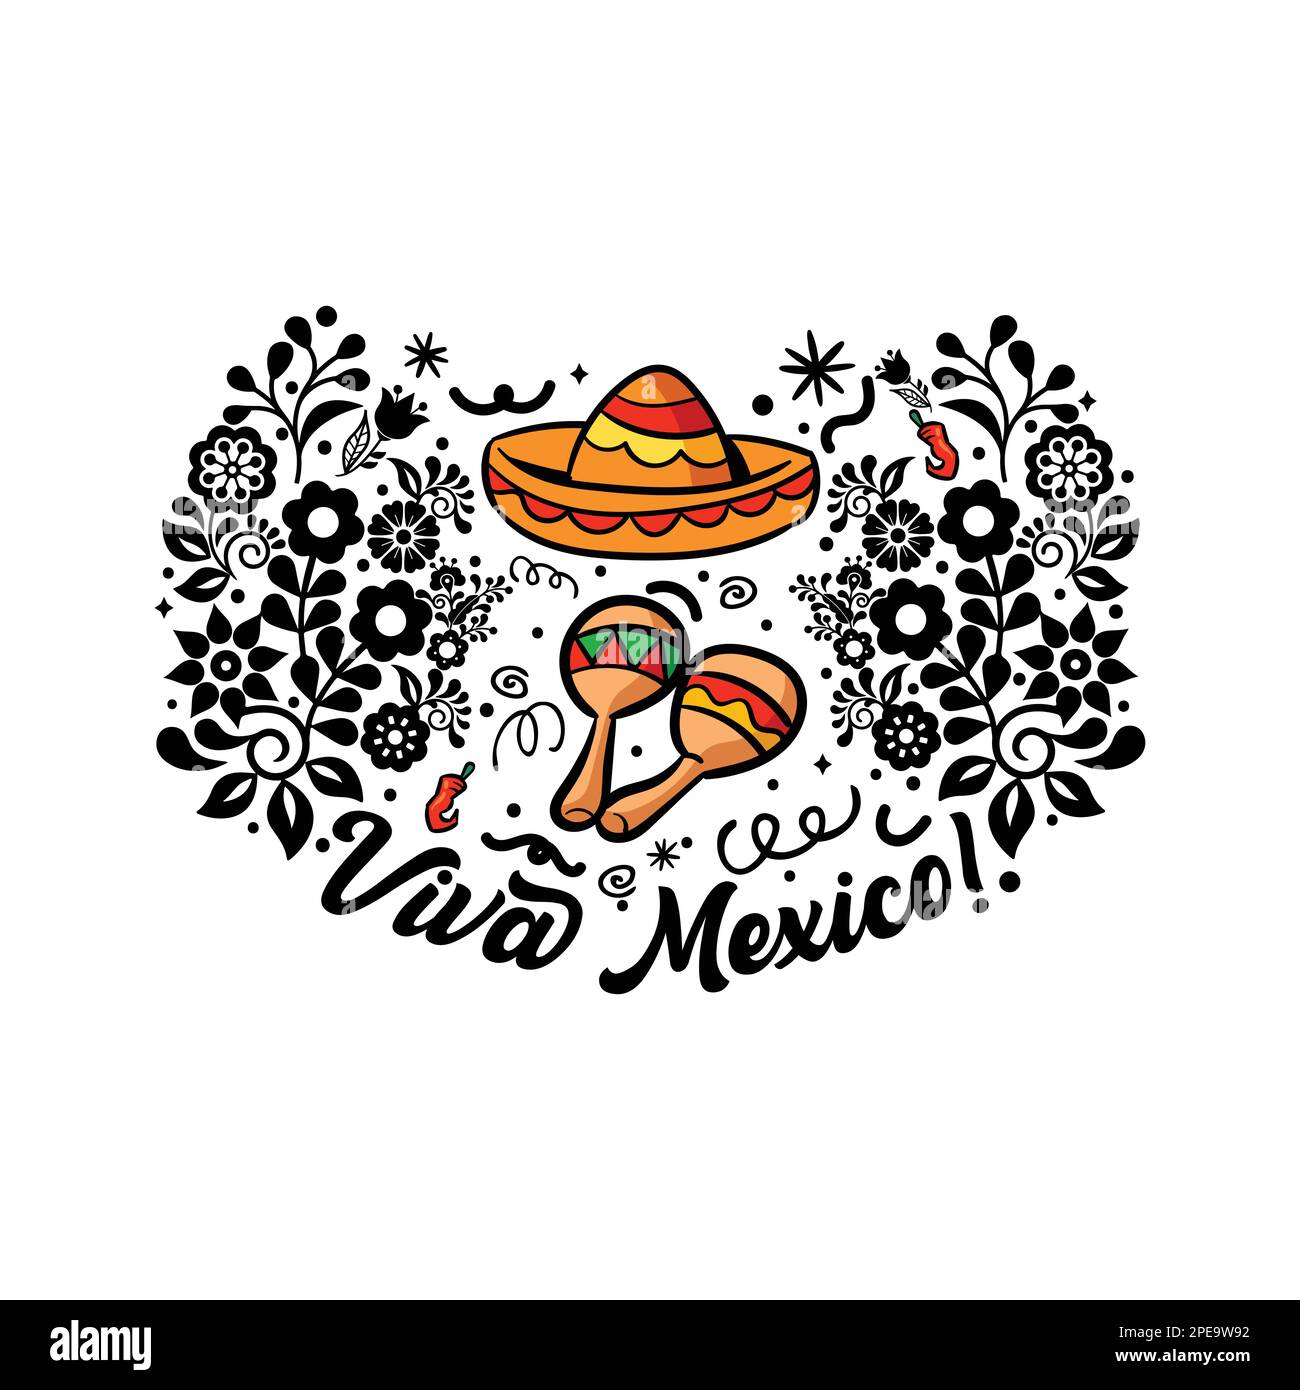 May 5, federal holiday in Mexico, Viva Mexico poster,viva mexico lettering,quote greeting card for Mexican holiday Stock Vector